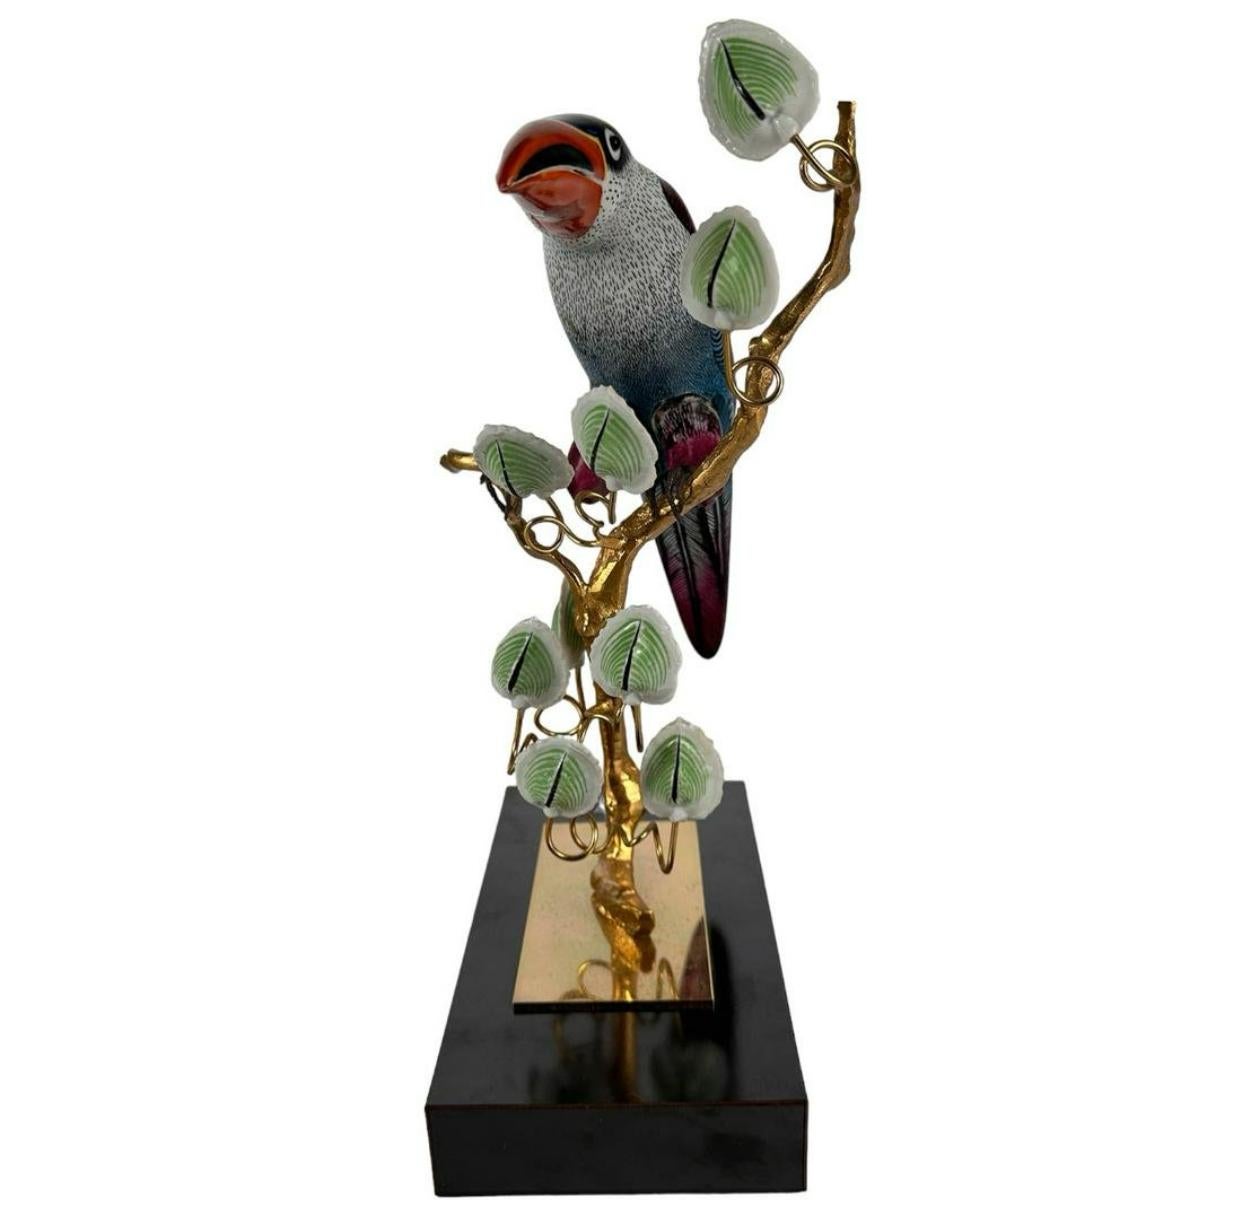 An Italian ceramic  toucan sculpture on a gilt bronze and tole metal wire tree branch by famed Italian artist Giulia Mangani. The colorful bird is accented by hand painted ceramic leaves. Mounted on a rectangular resin plinth. Makers label Mangiani